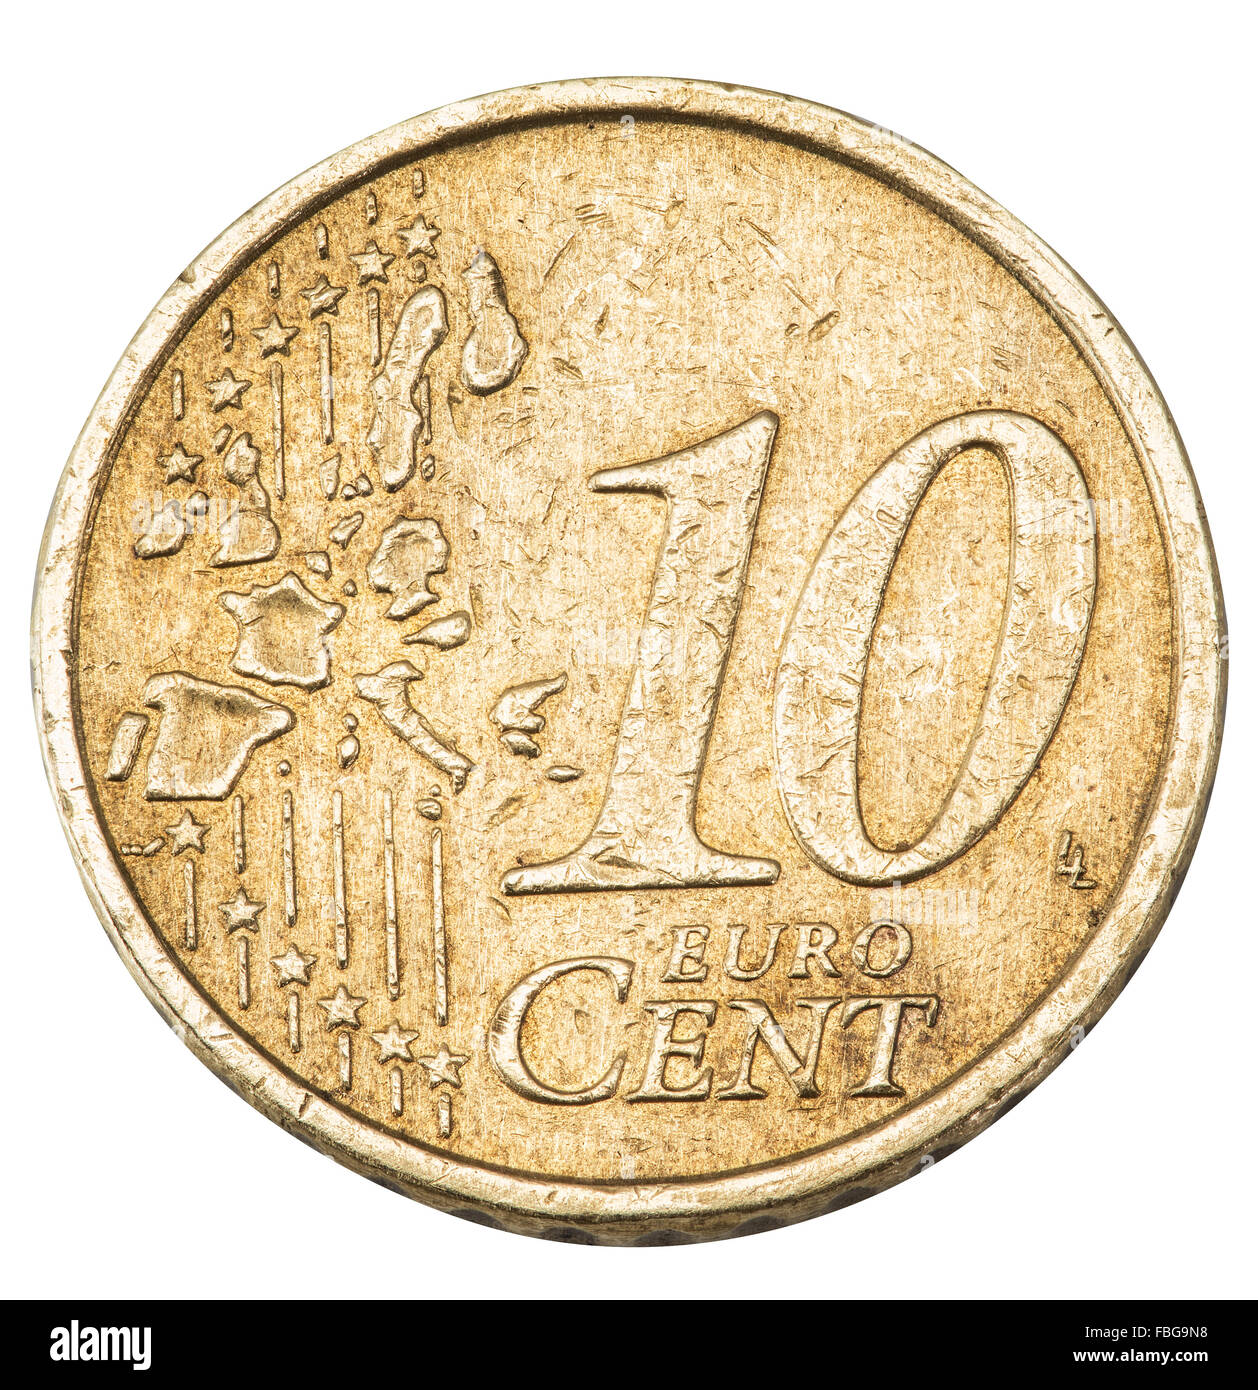 Old ten cents euro coin isolated on a white background. File contains clipping paths. Stock Photo